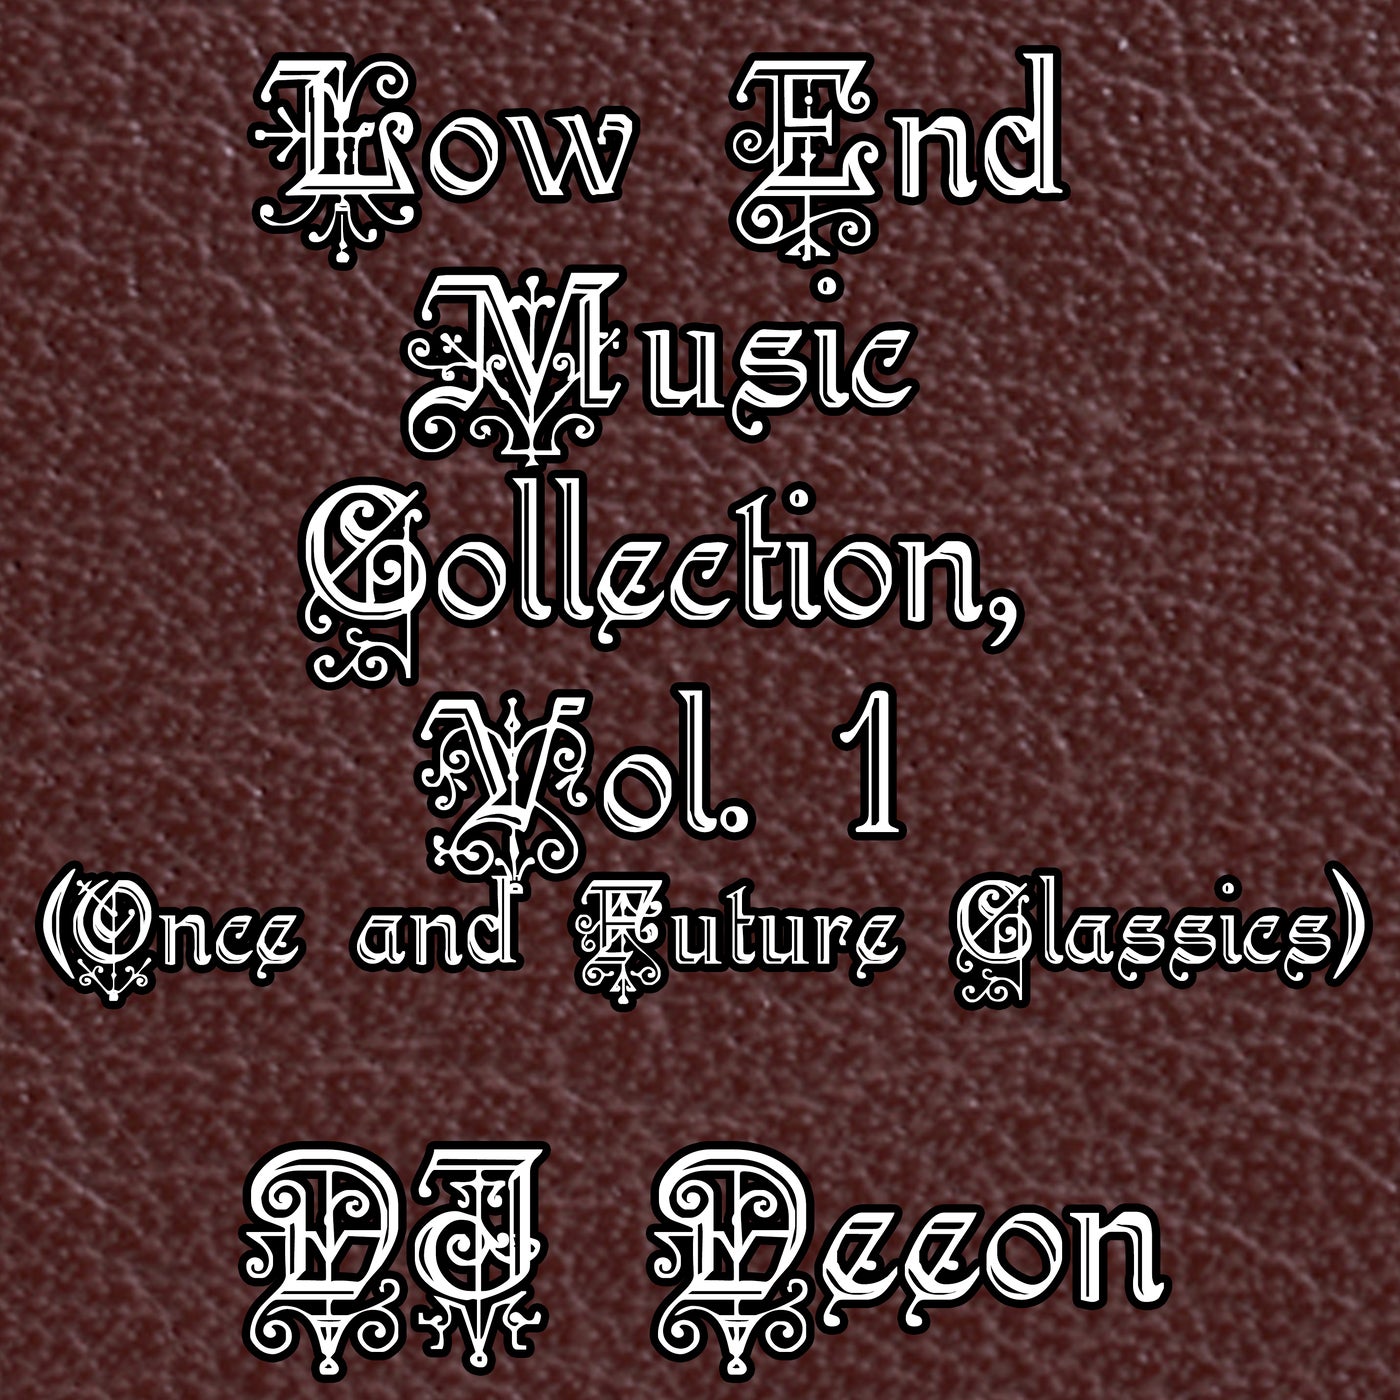 Low End Music Collection, Vol. 1